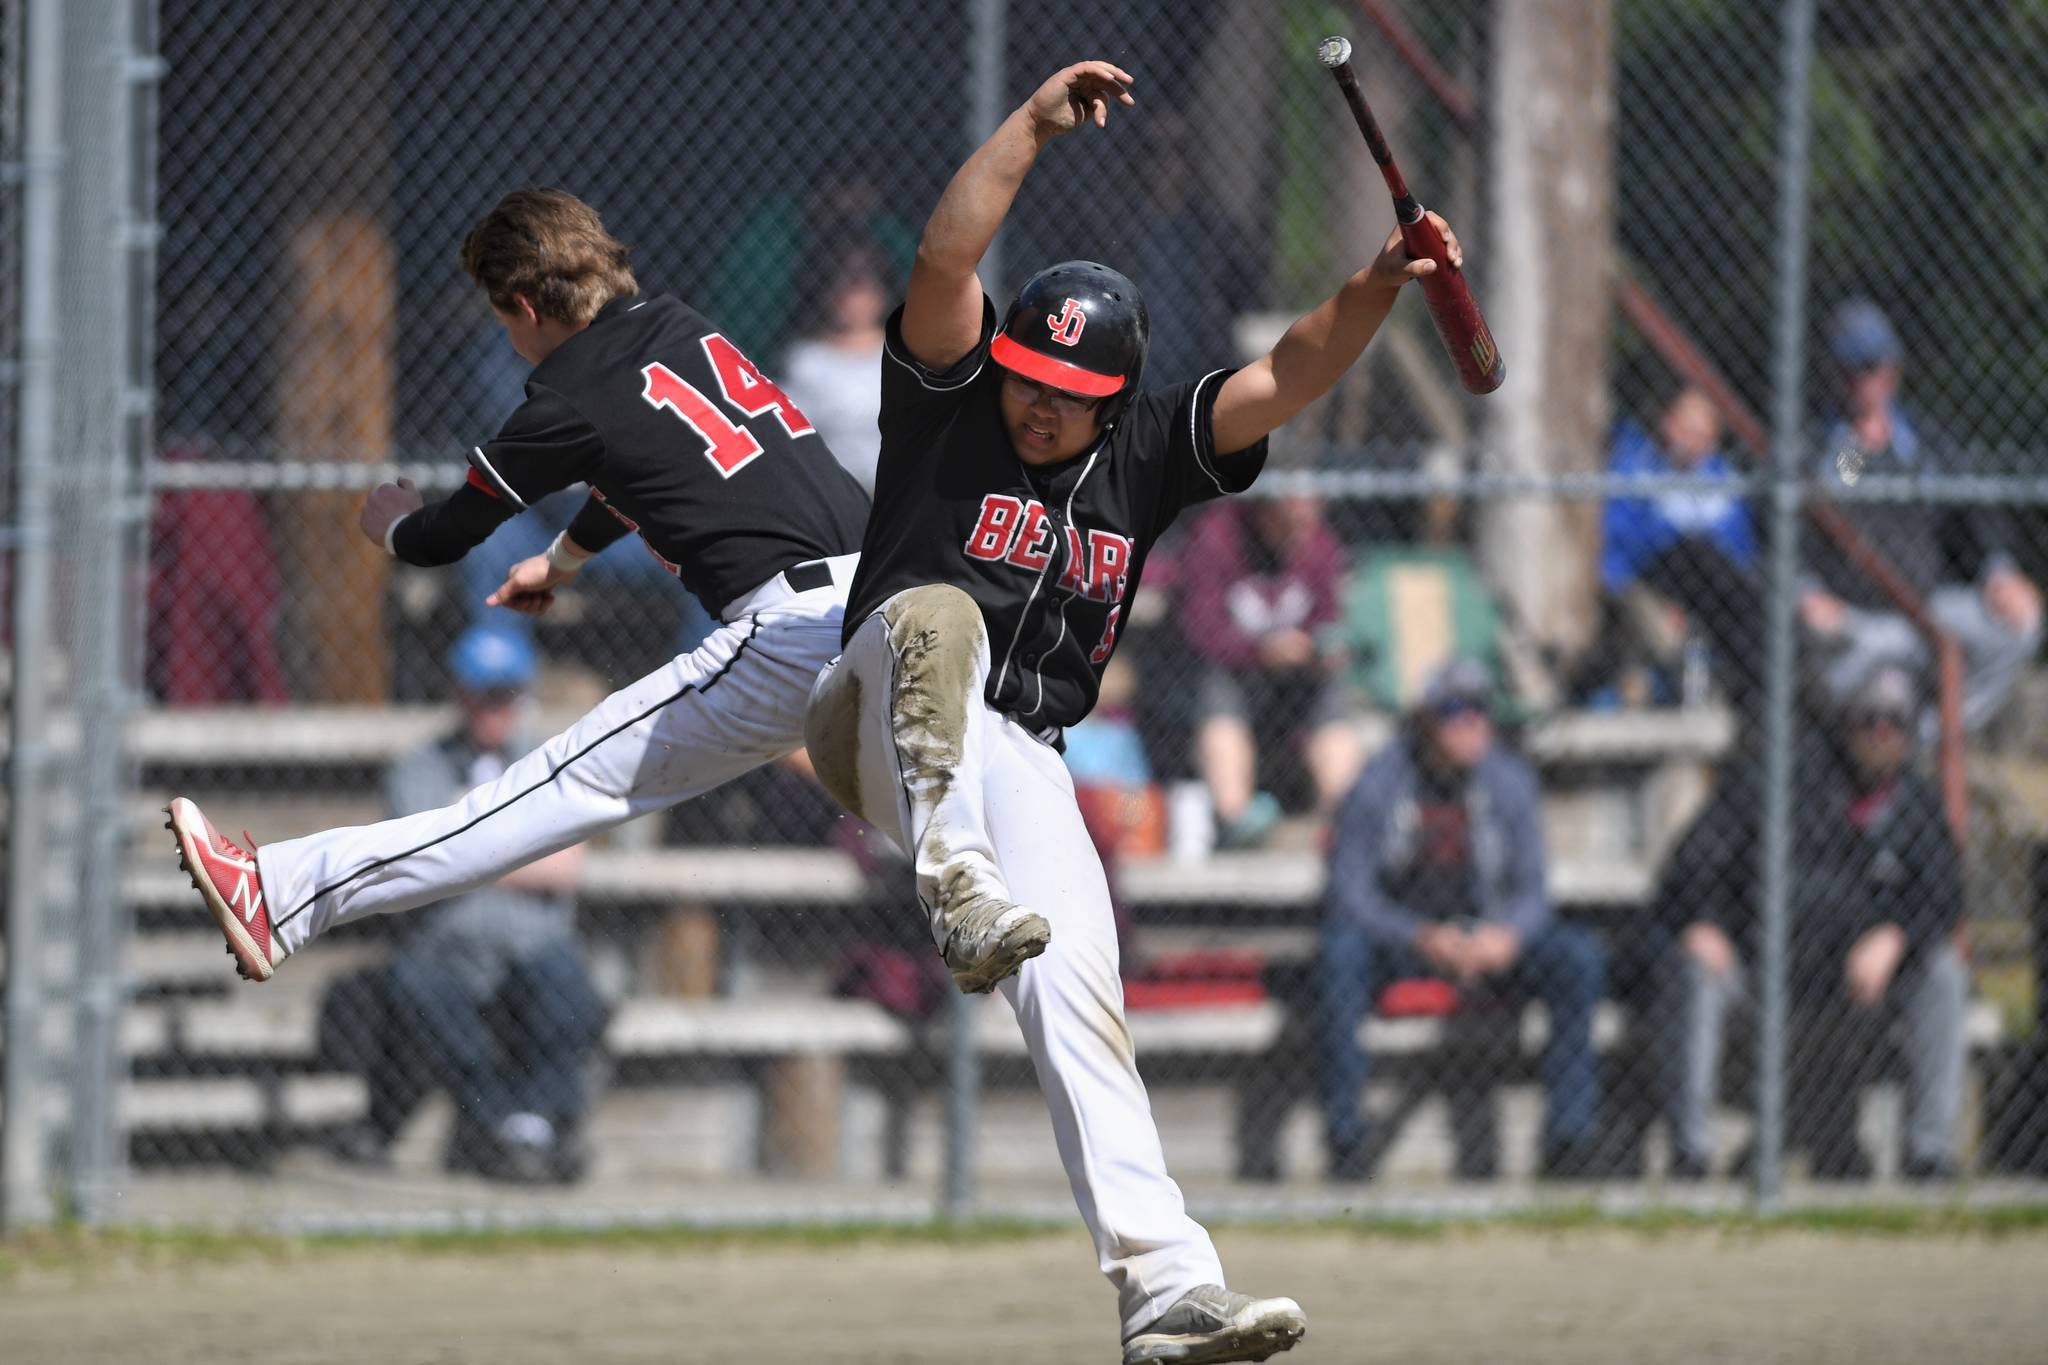 Crimson Bears baseball wants to play ‘fearless’ at state tournament